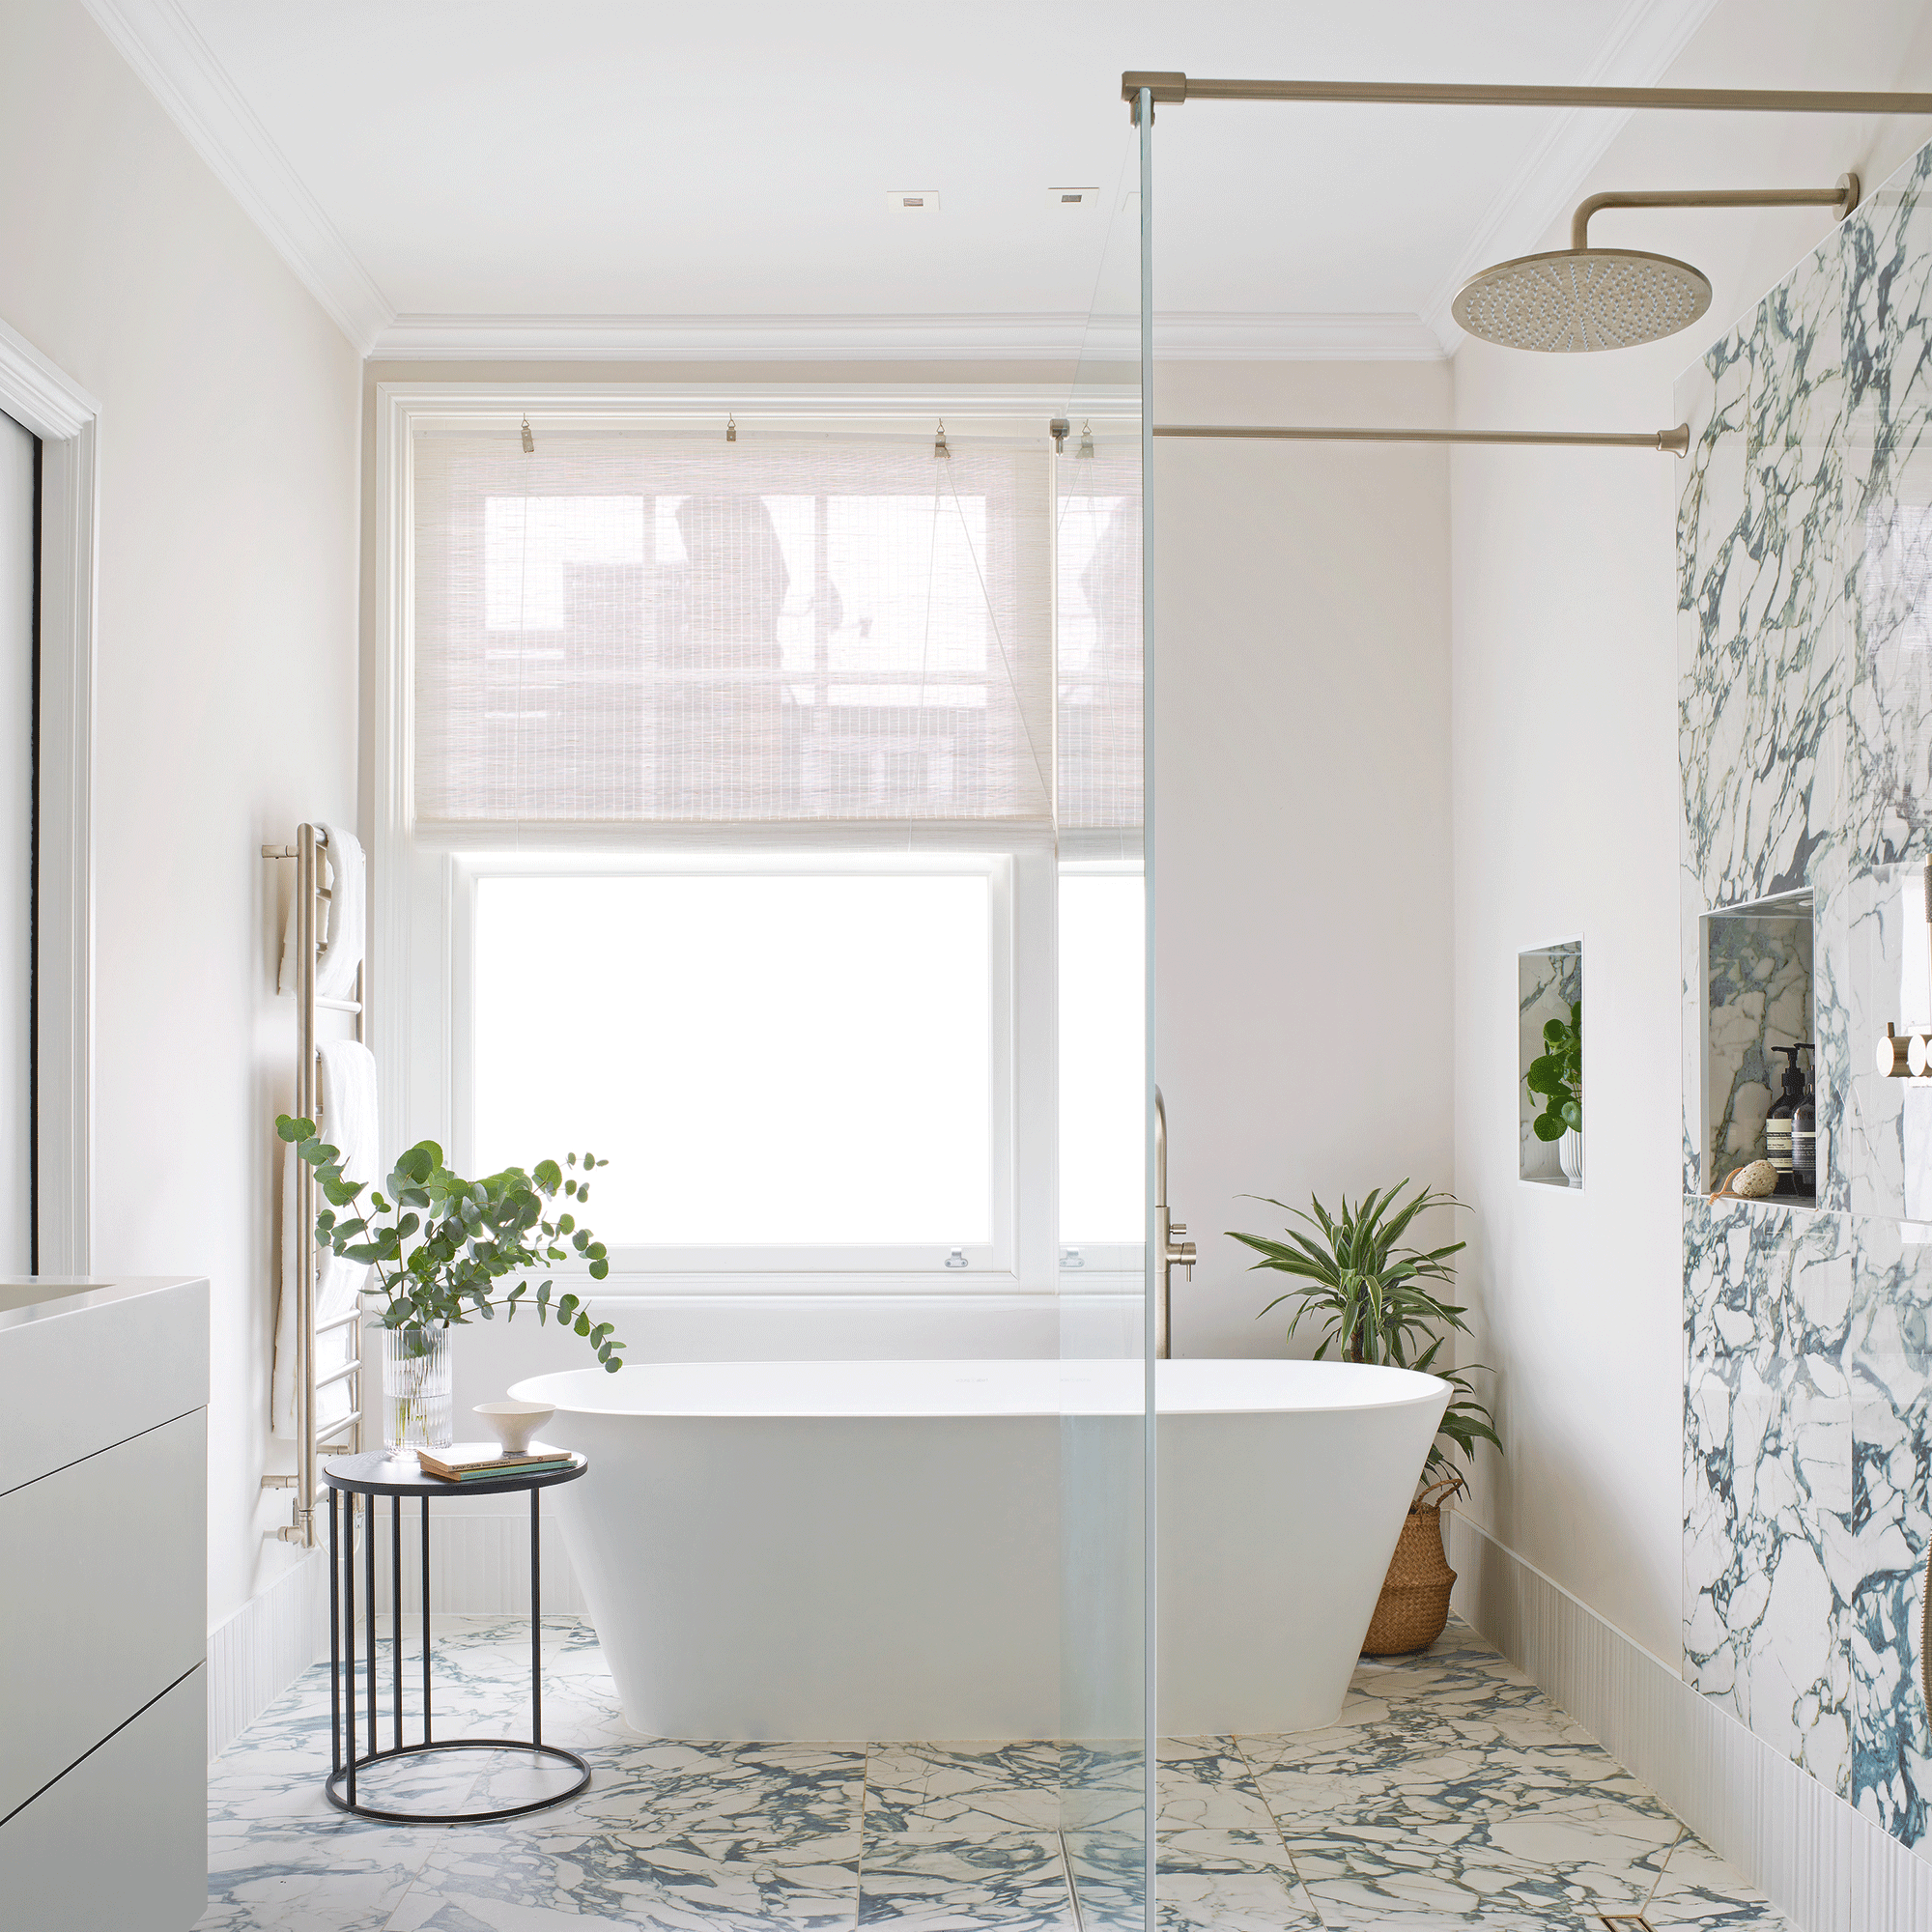 How to make your bathroom look expensive on a budget